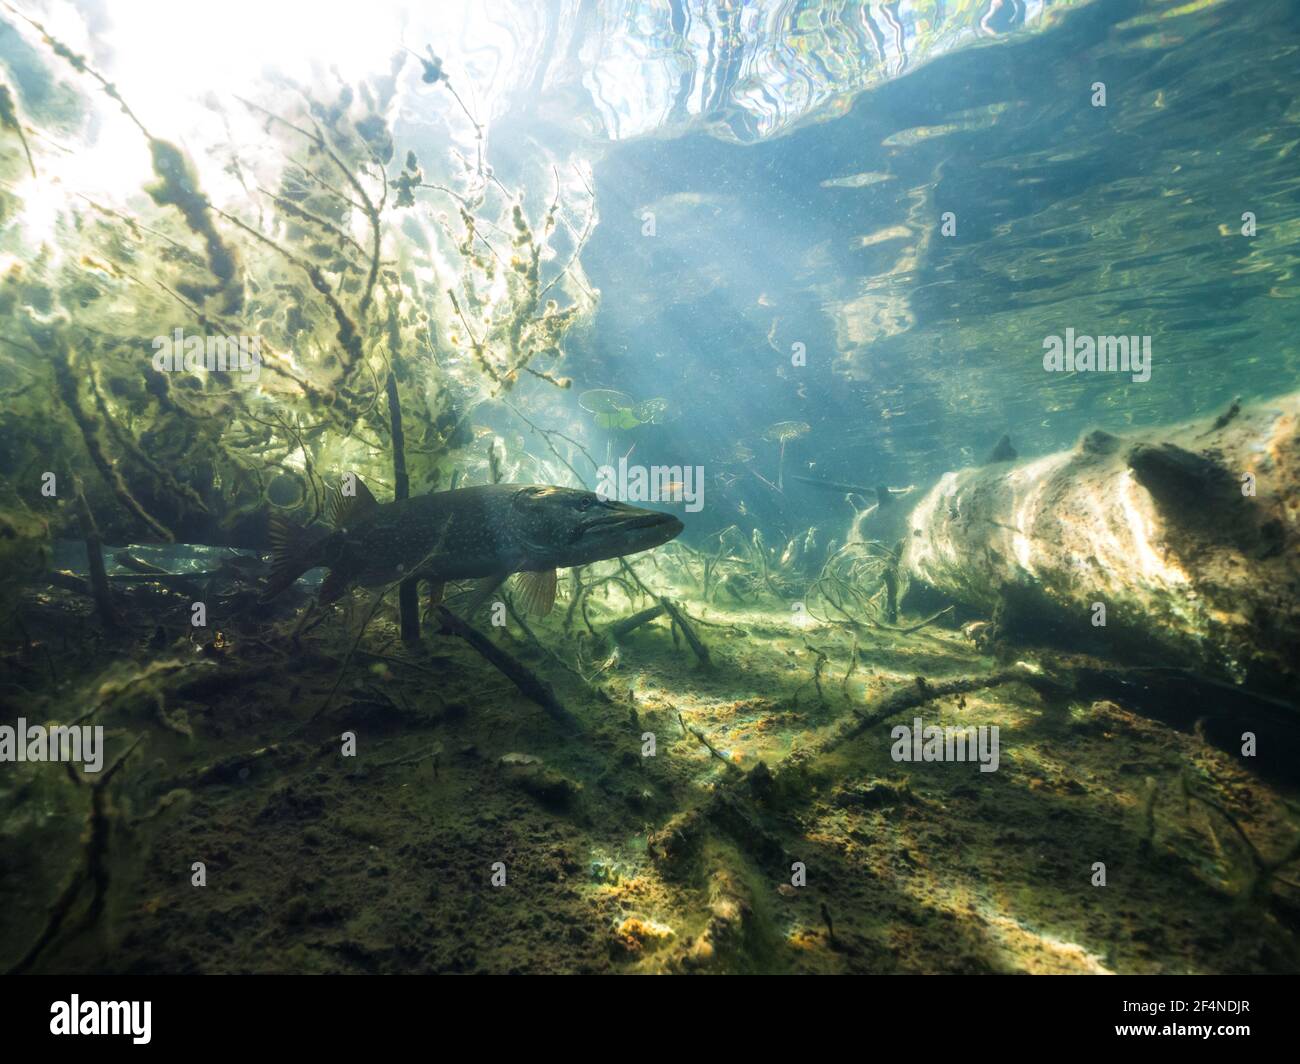 Big pike staying under branches in shallow water Stock Photo